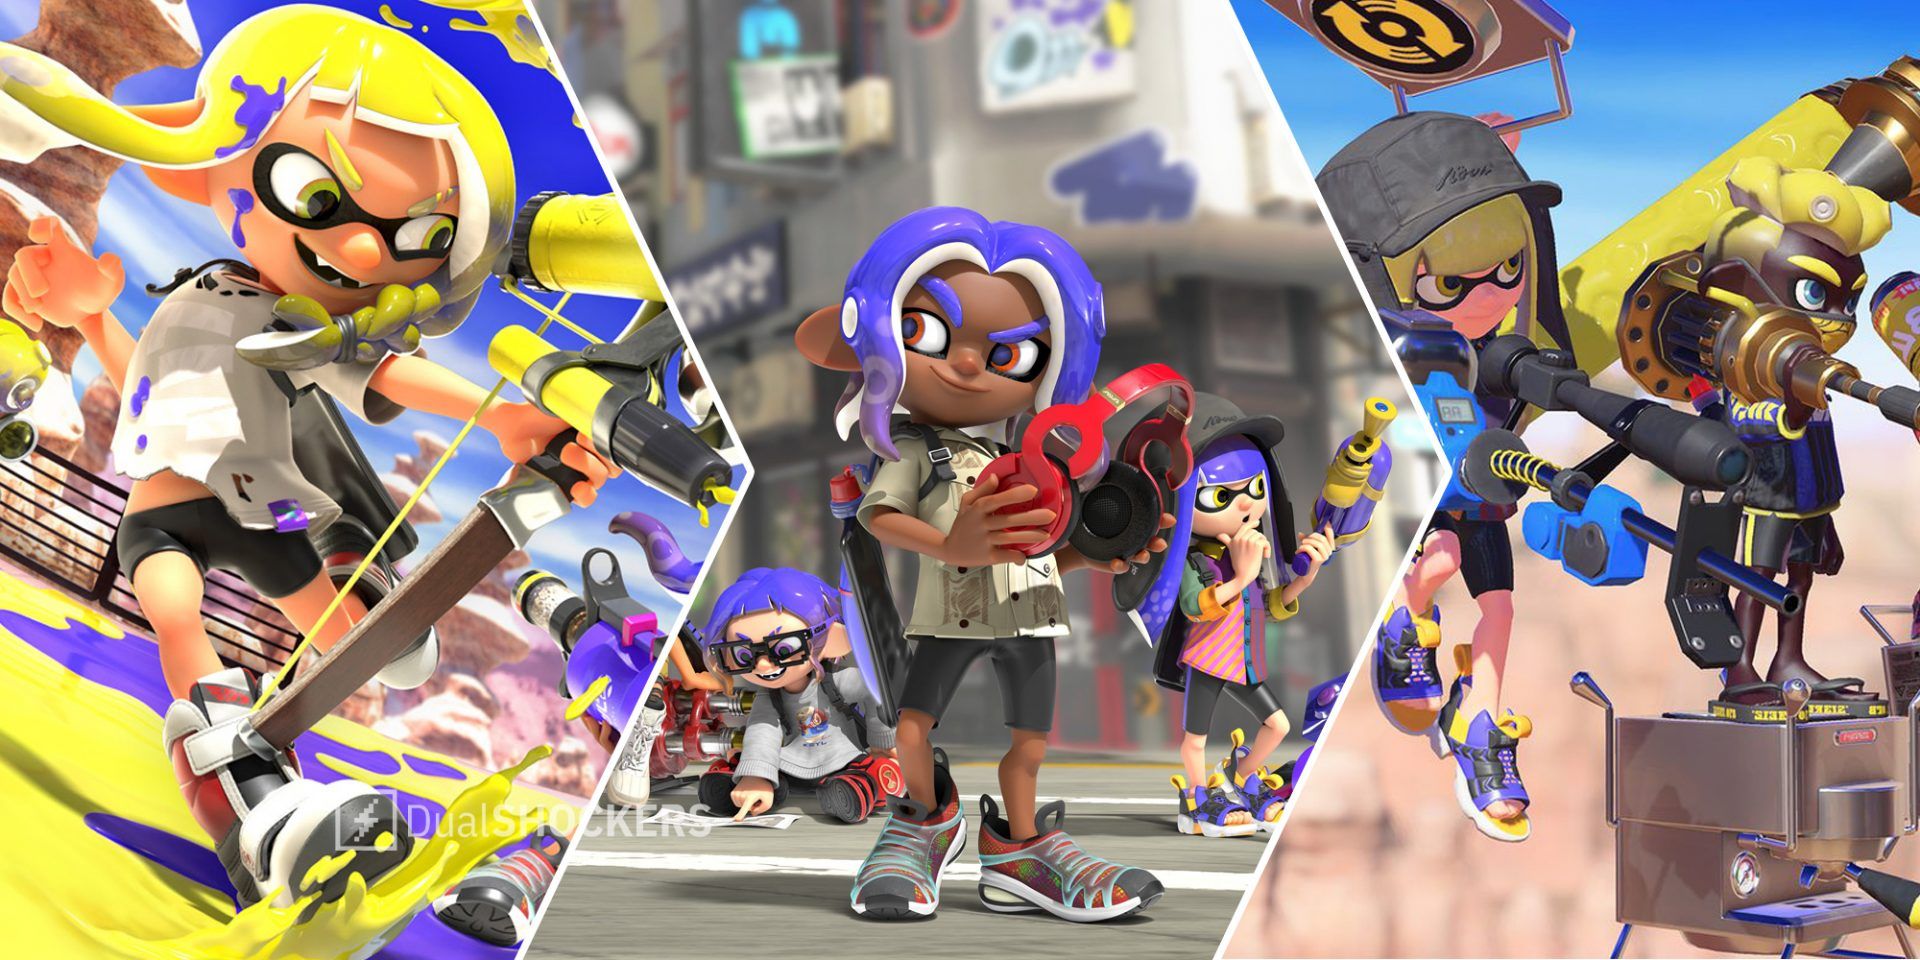 Splatoon 3 characters with various weapons